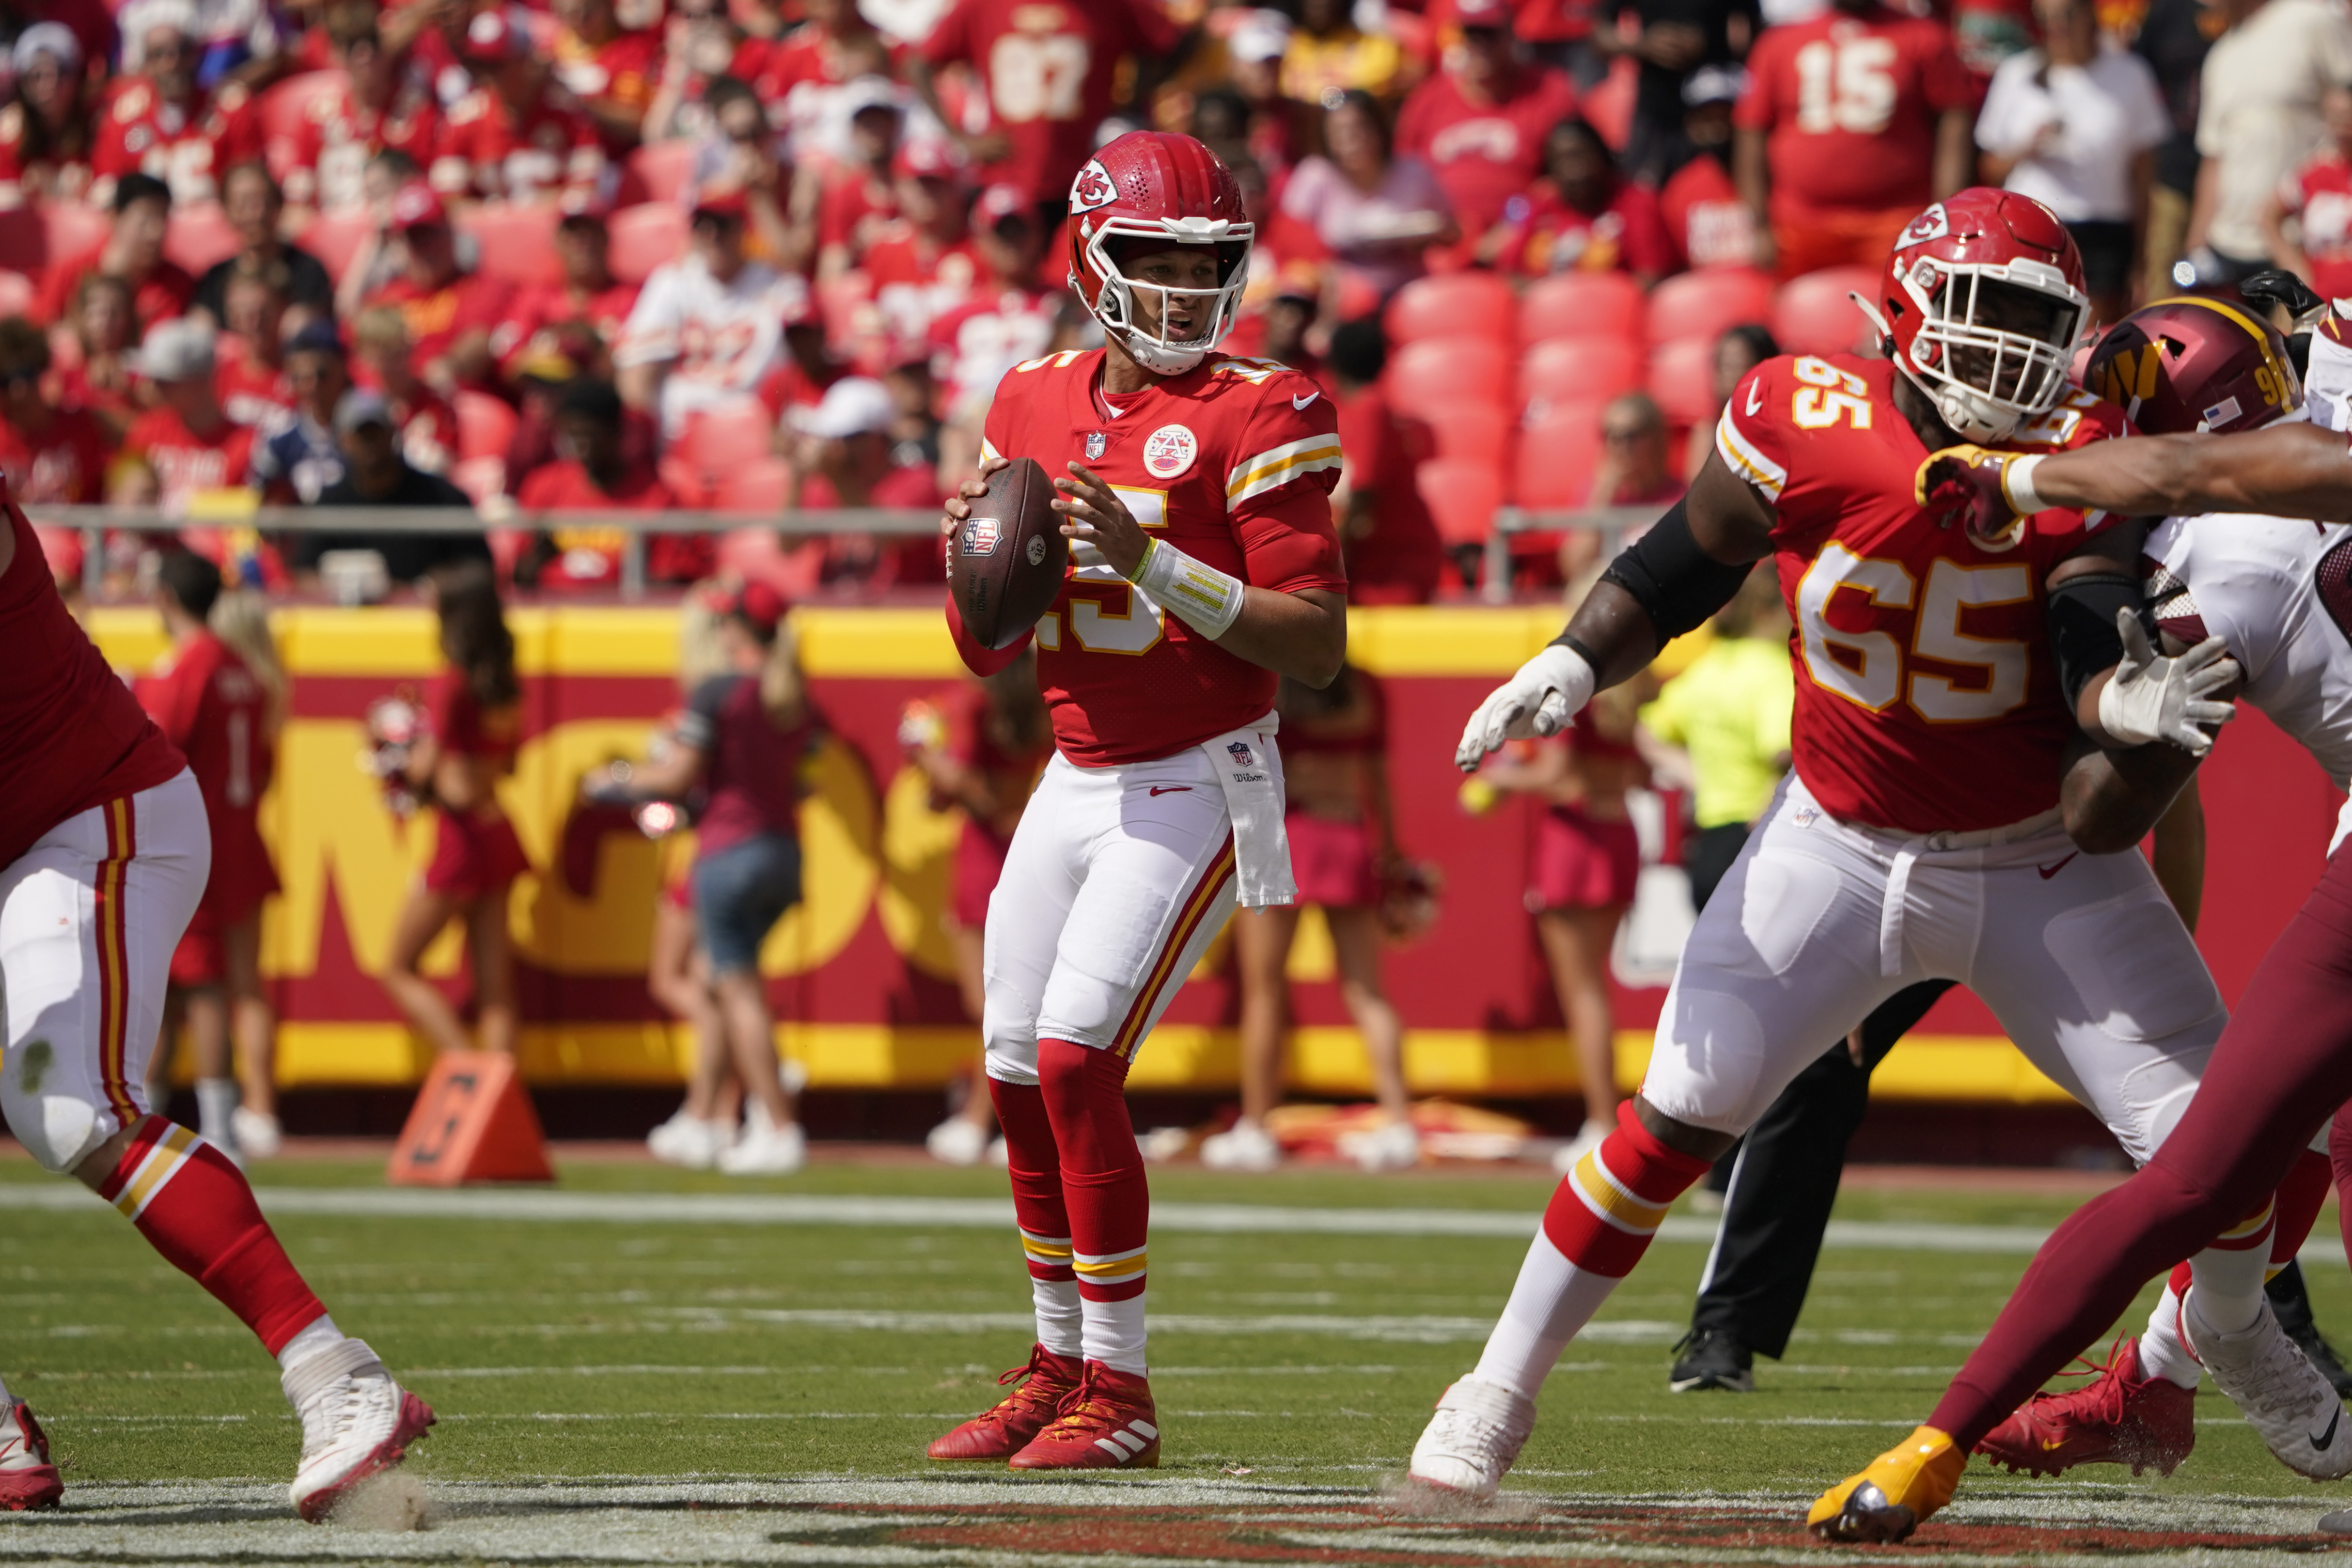 Chiefs vs. Steelers preseason game to be broadcast on NFL Network